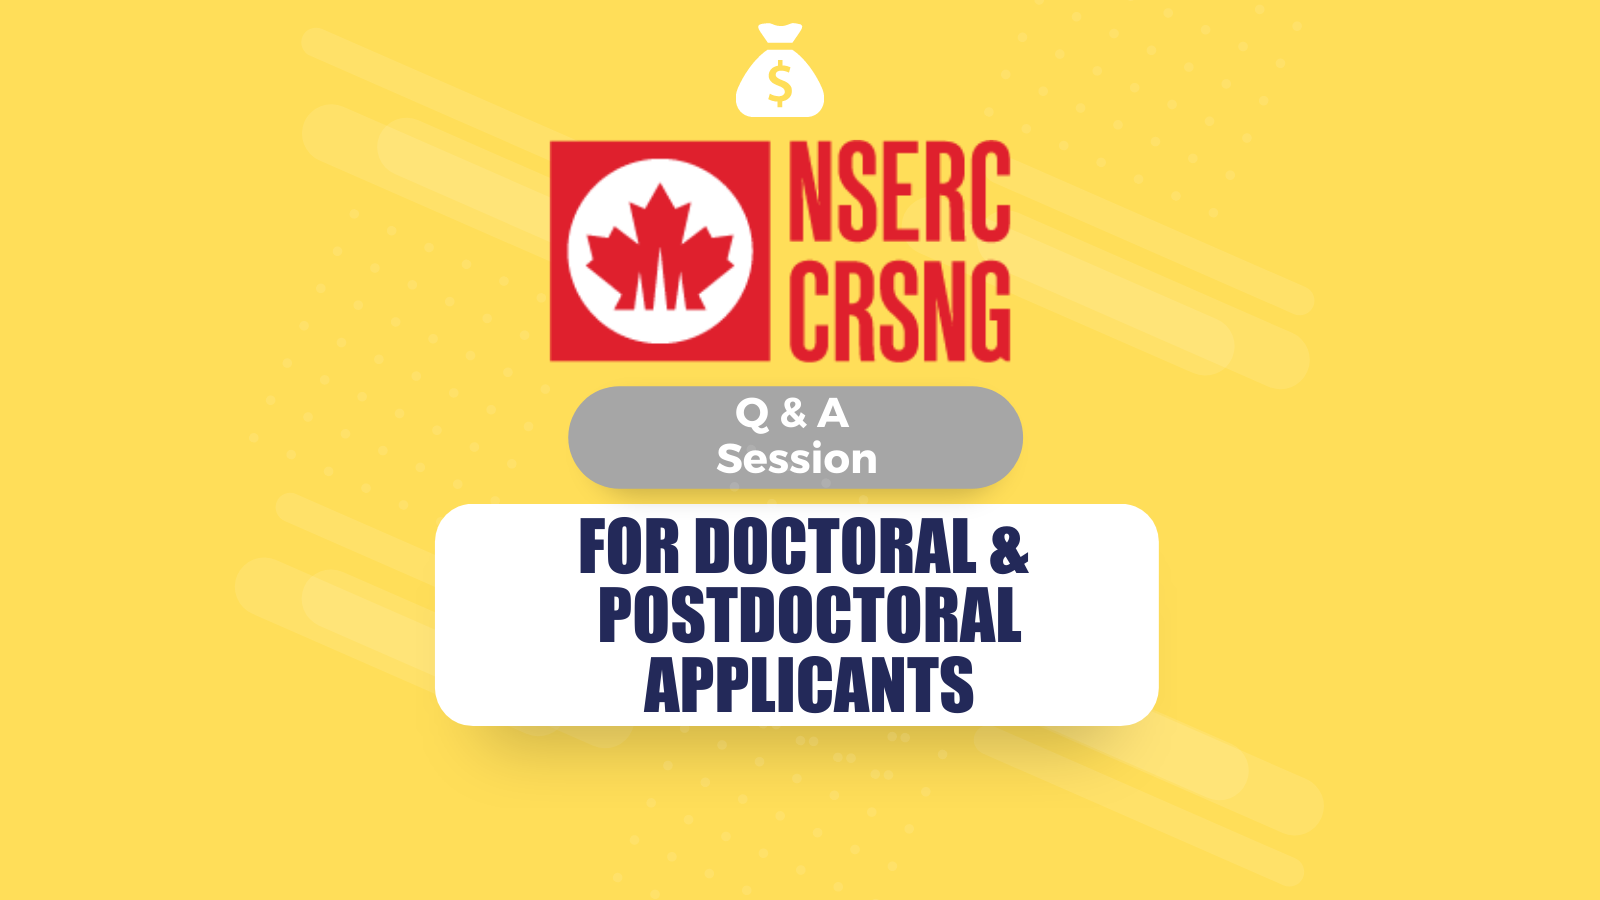 NSERC Q&A Session for doctoral and postdoctoral applicants